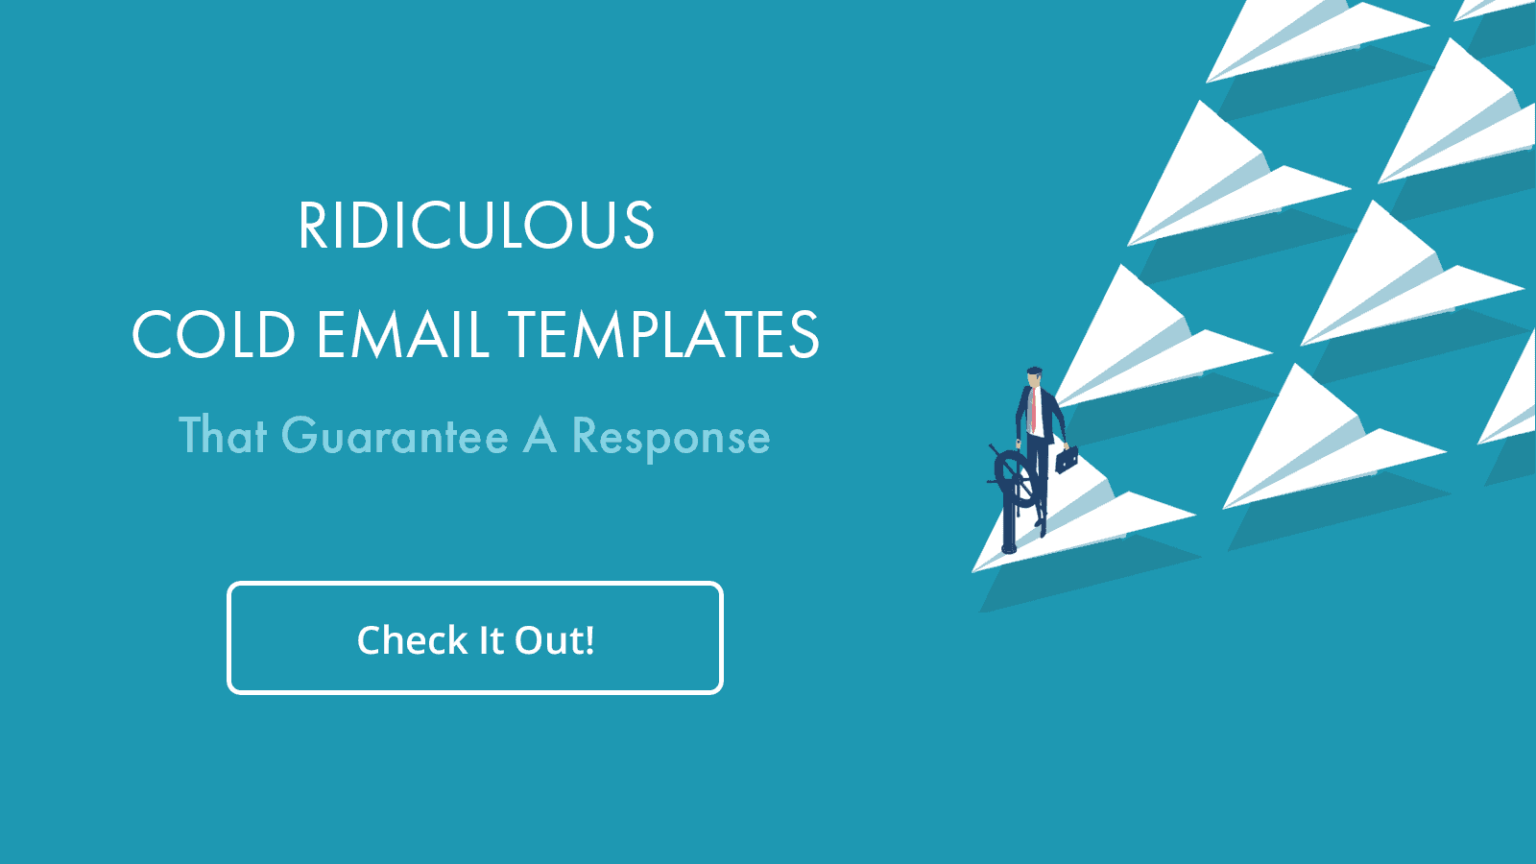 Ridiculous Cold Email Templates That Guarantee A Response